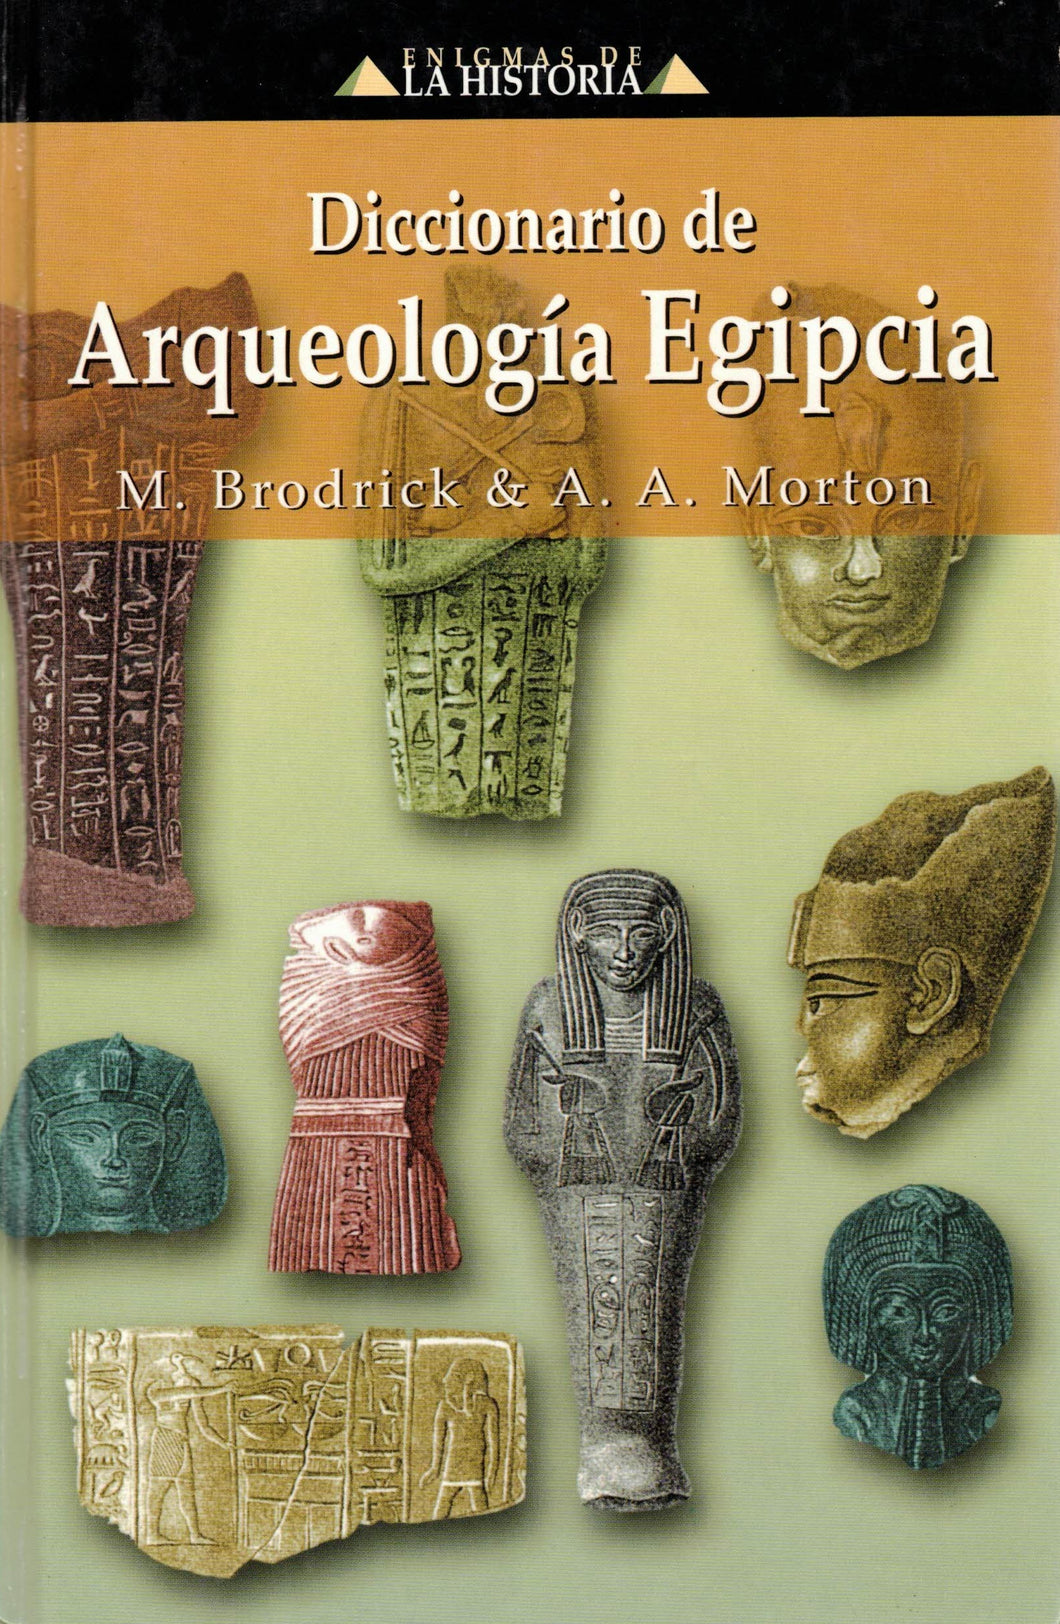 Dictionary of Egyptian Archeology - M. BRODRICK & AA MORTON - C-198 (book, hardcover)(very good second hand)